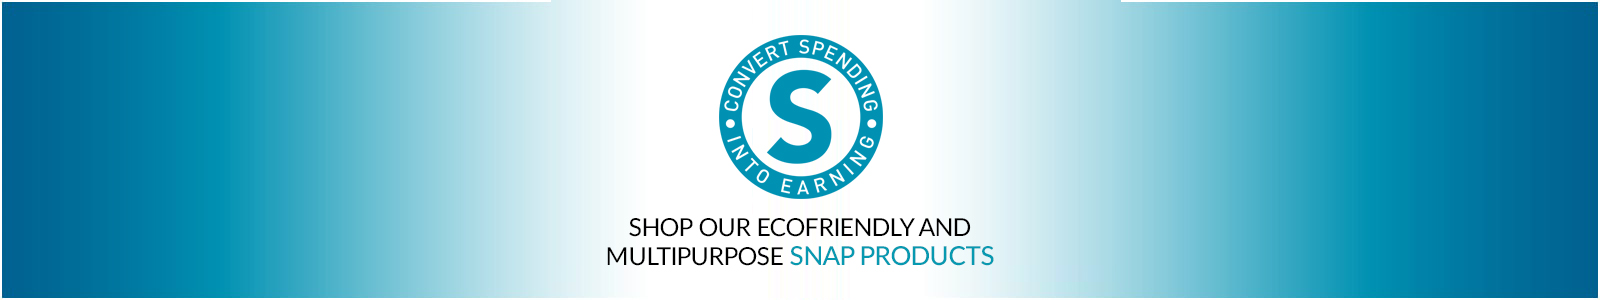 shop our ecofriendly and multipurpose snap products